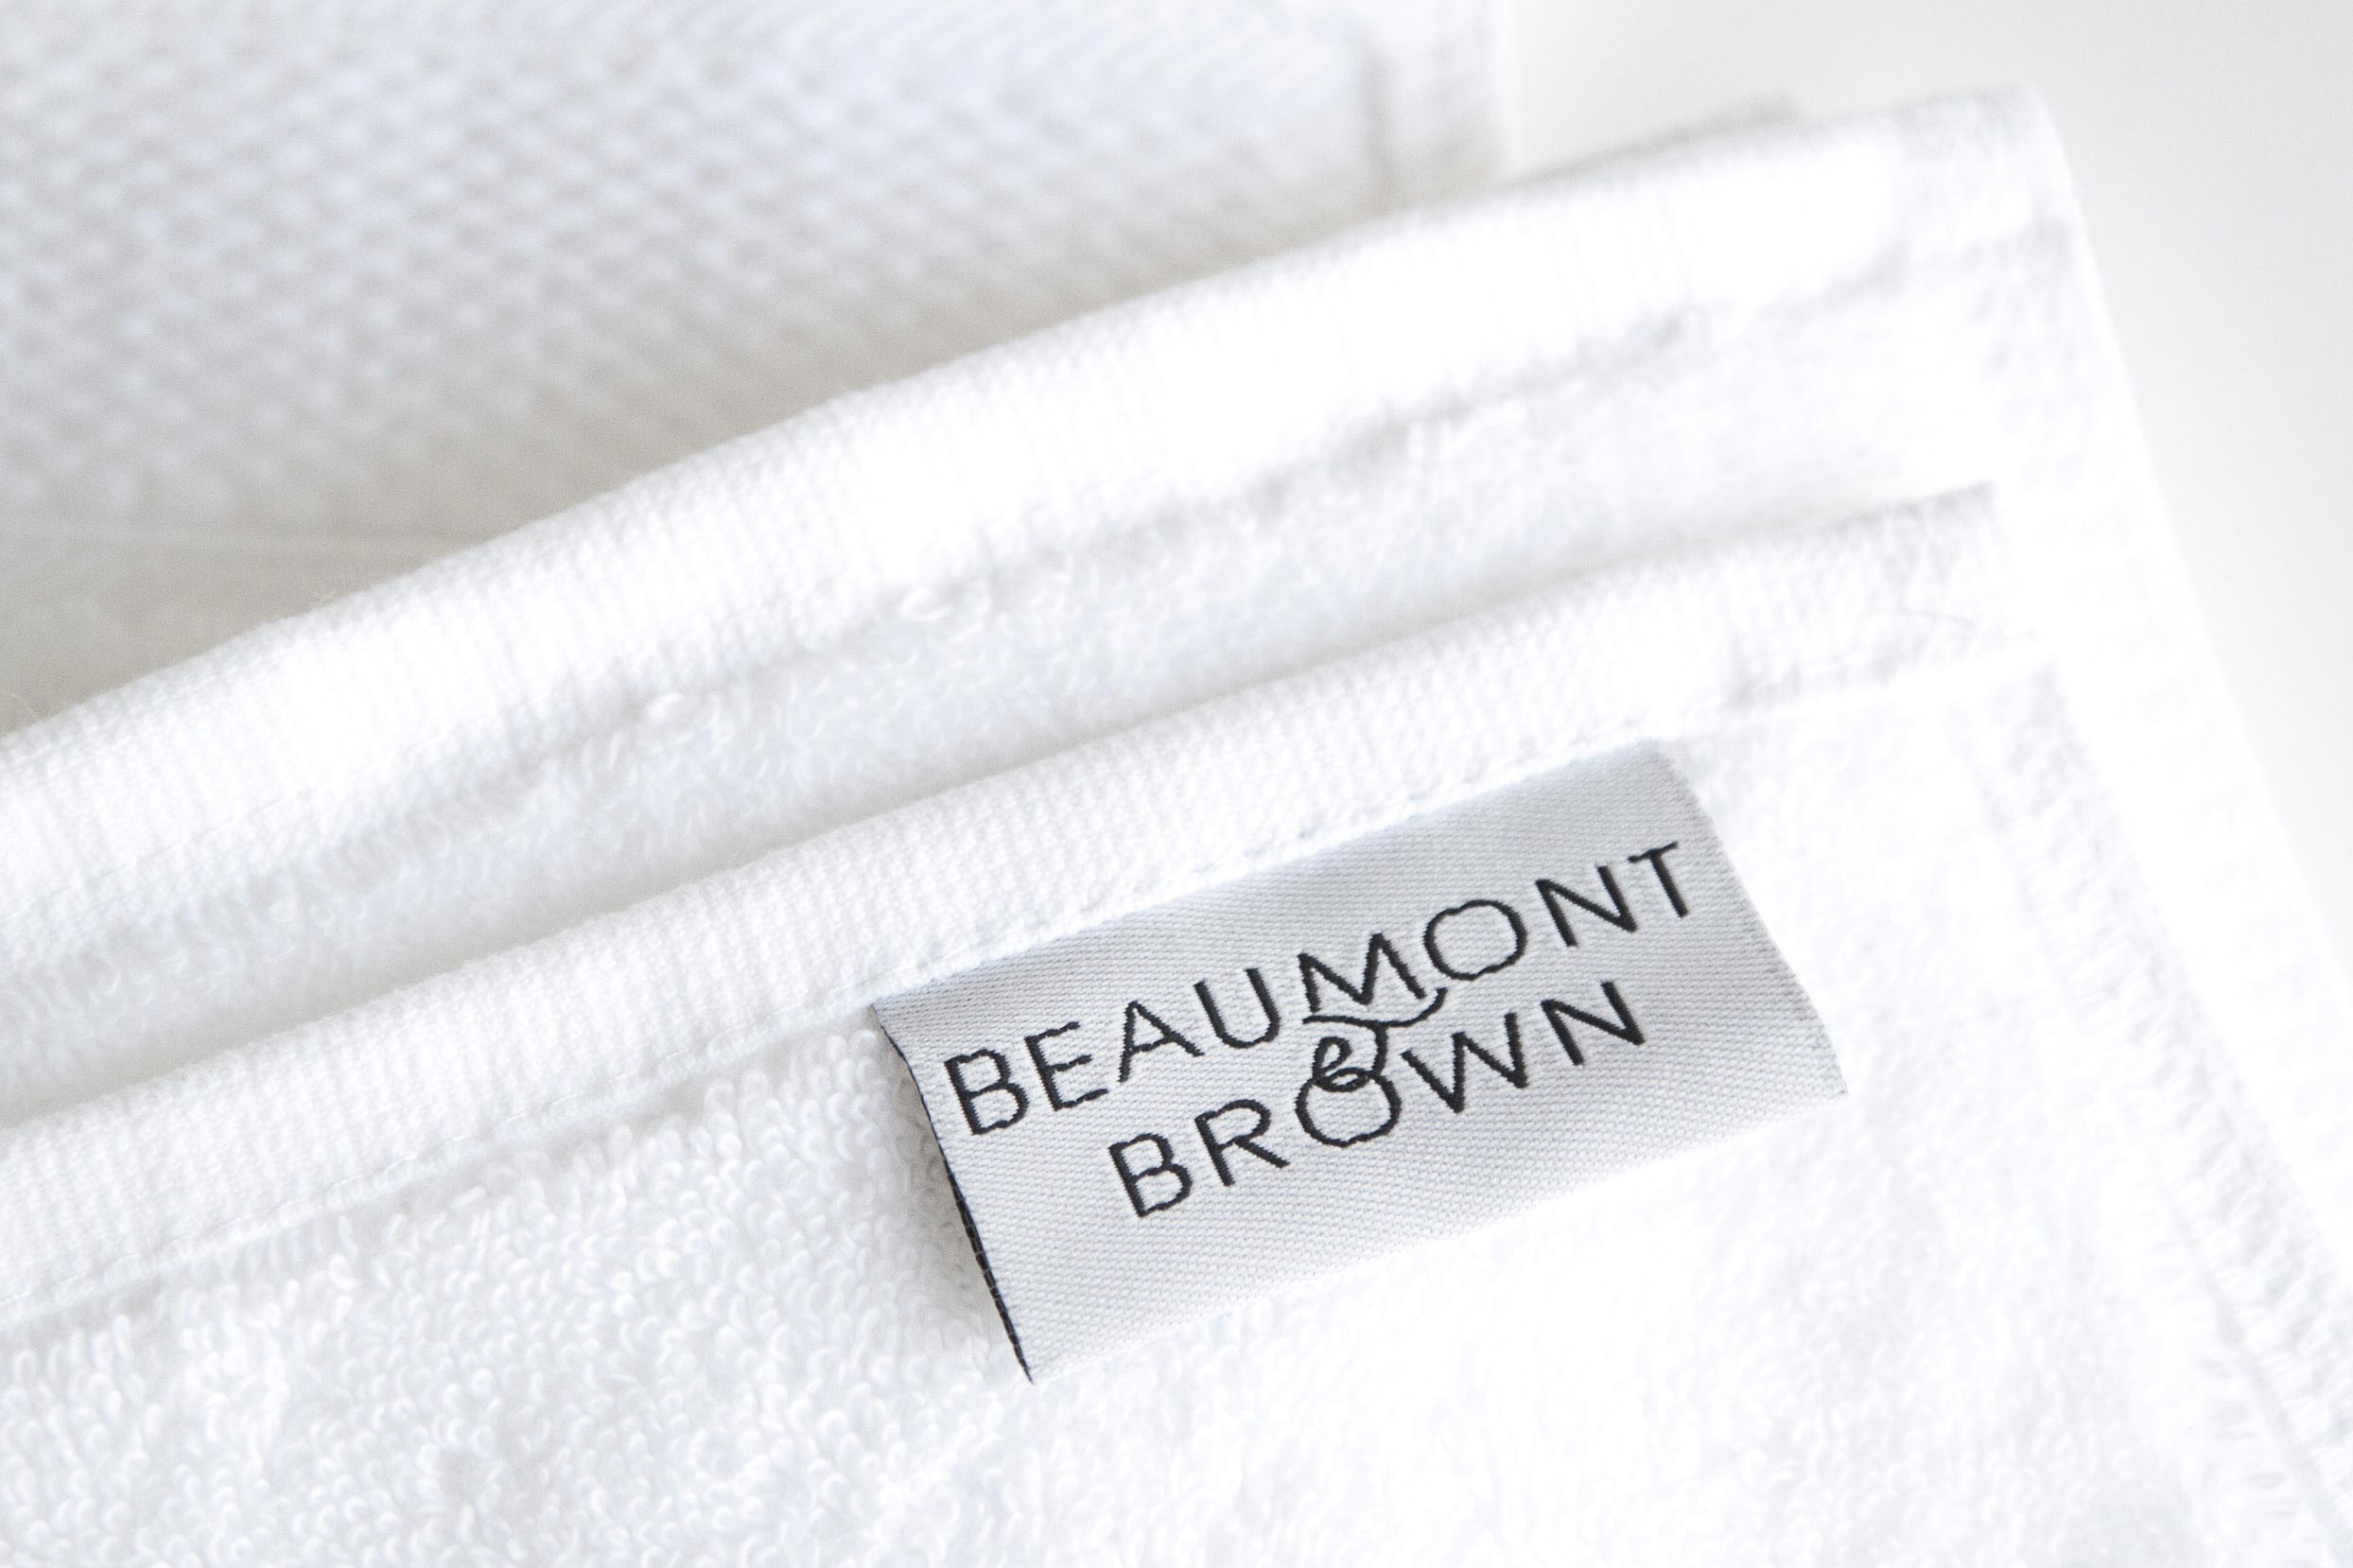 Beaumont & Brown